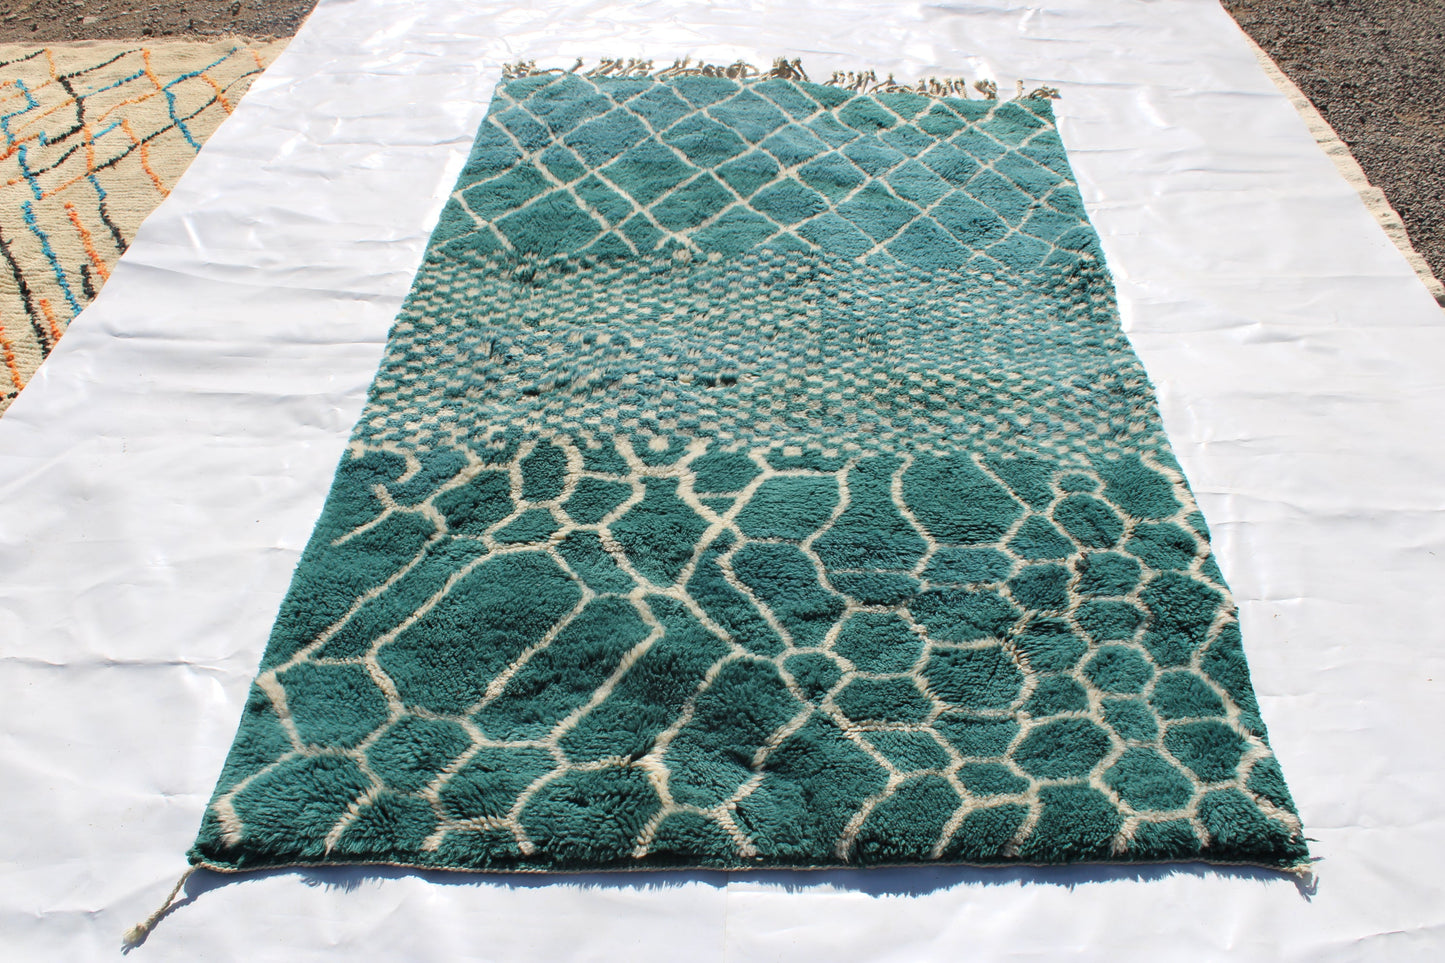 Beni Ourain rugs originate from the Atlas Mountains of Morocco and are characterized by their distinctive, neutral-toned, and geometric designs. These handwoven rugs often feature a plush pile and are made by the Berber tribes,  size is 260x192 cm